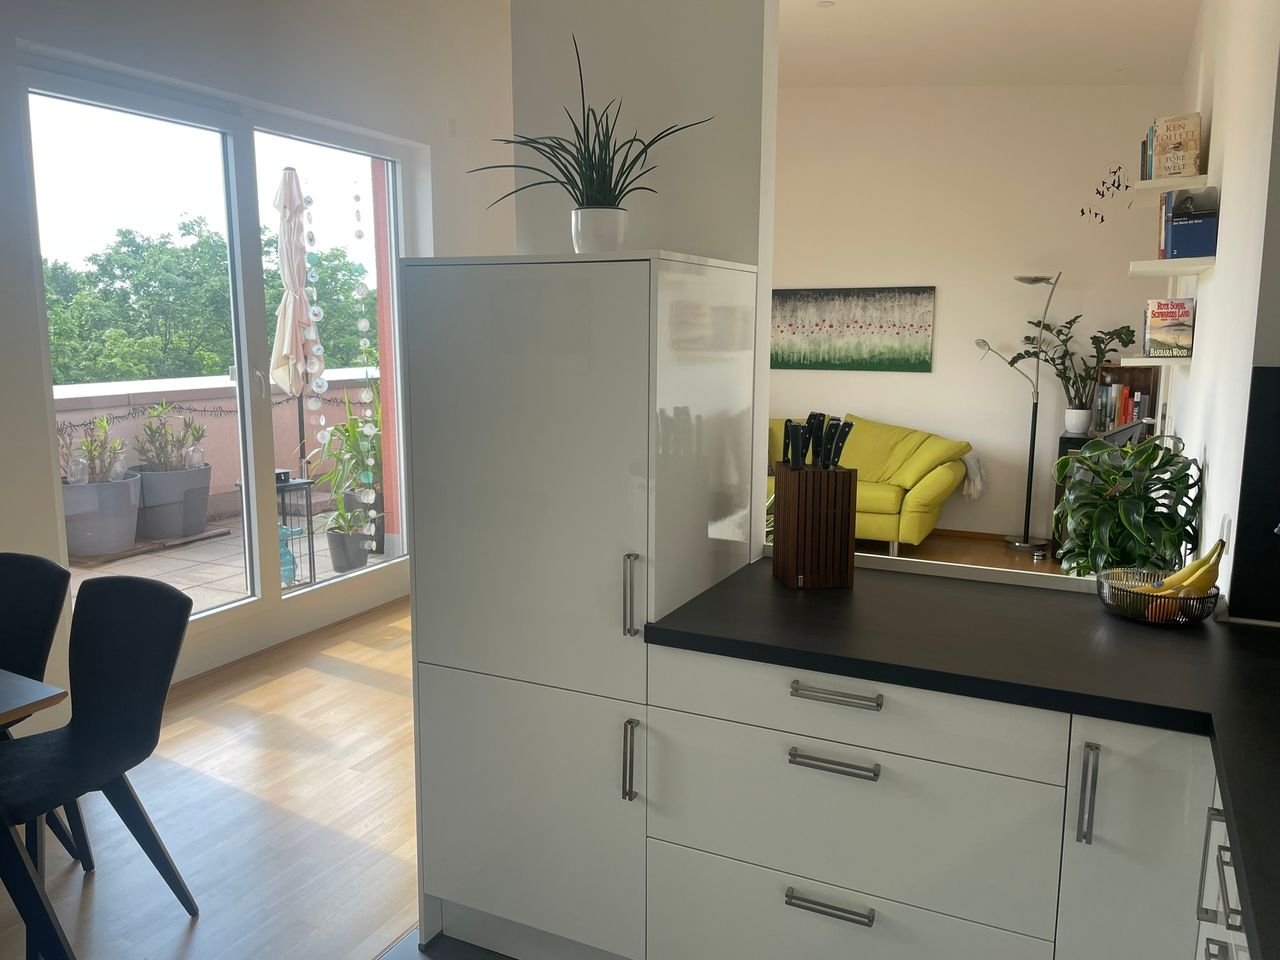 Spacious, stylishly furnished home in a quiet but central part of Mainz